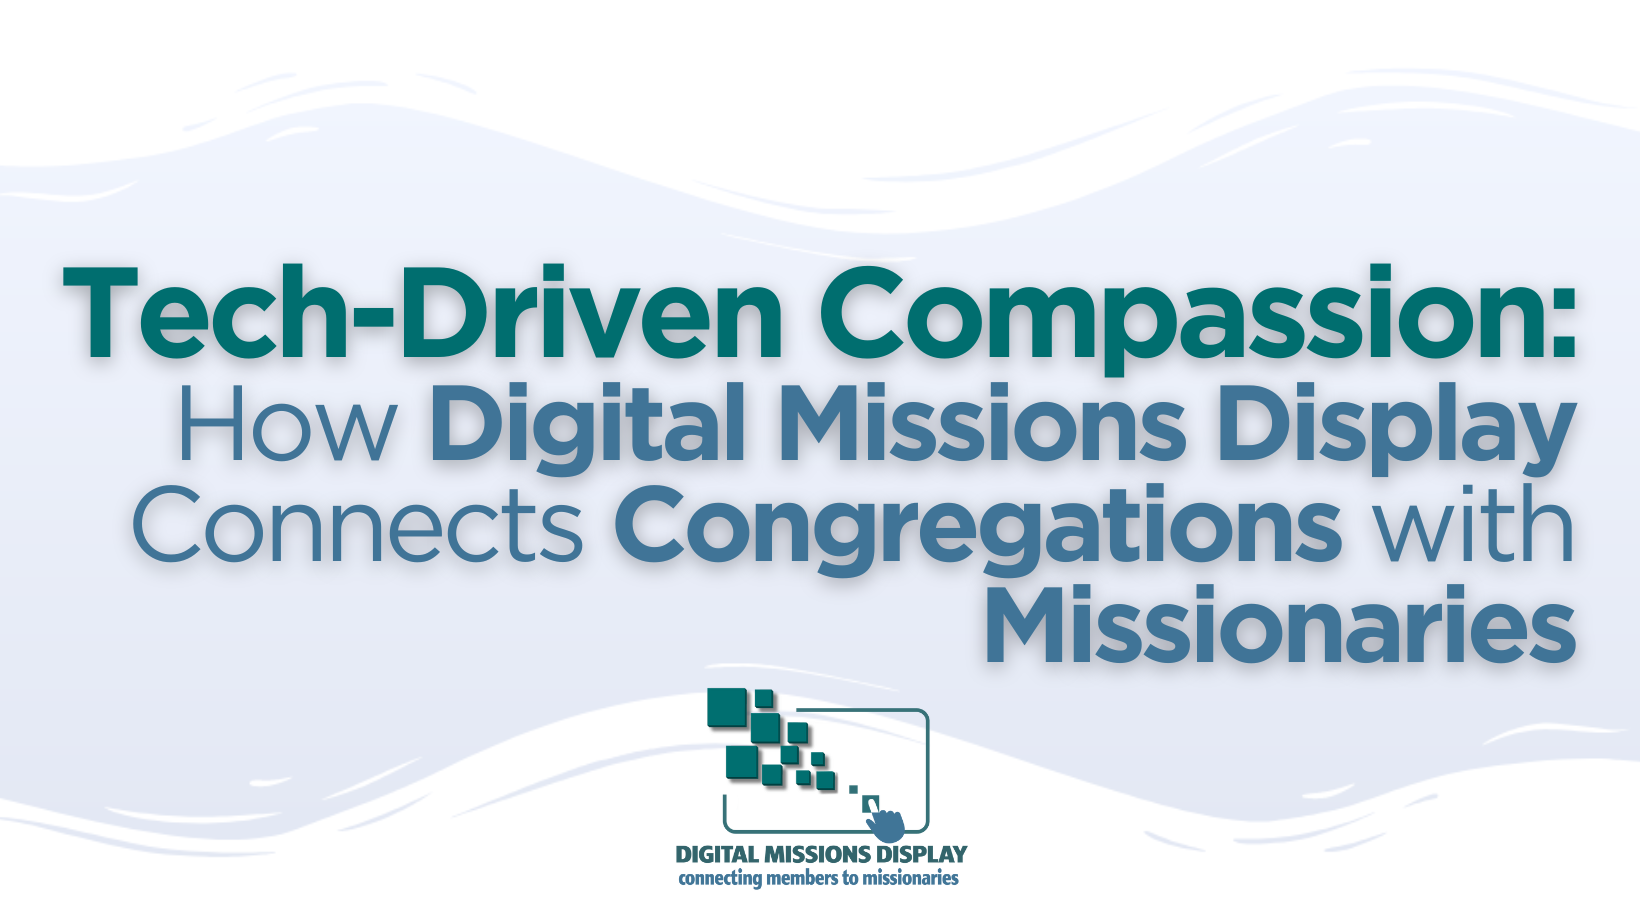 You are currently viewing Tech-Driven Compassion: How Digital Missions Display Connects Congregations with Missionaries